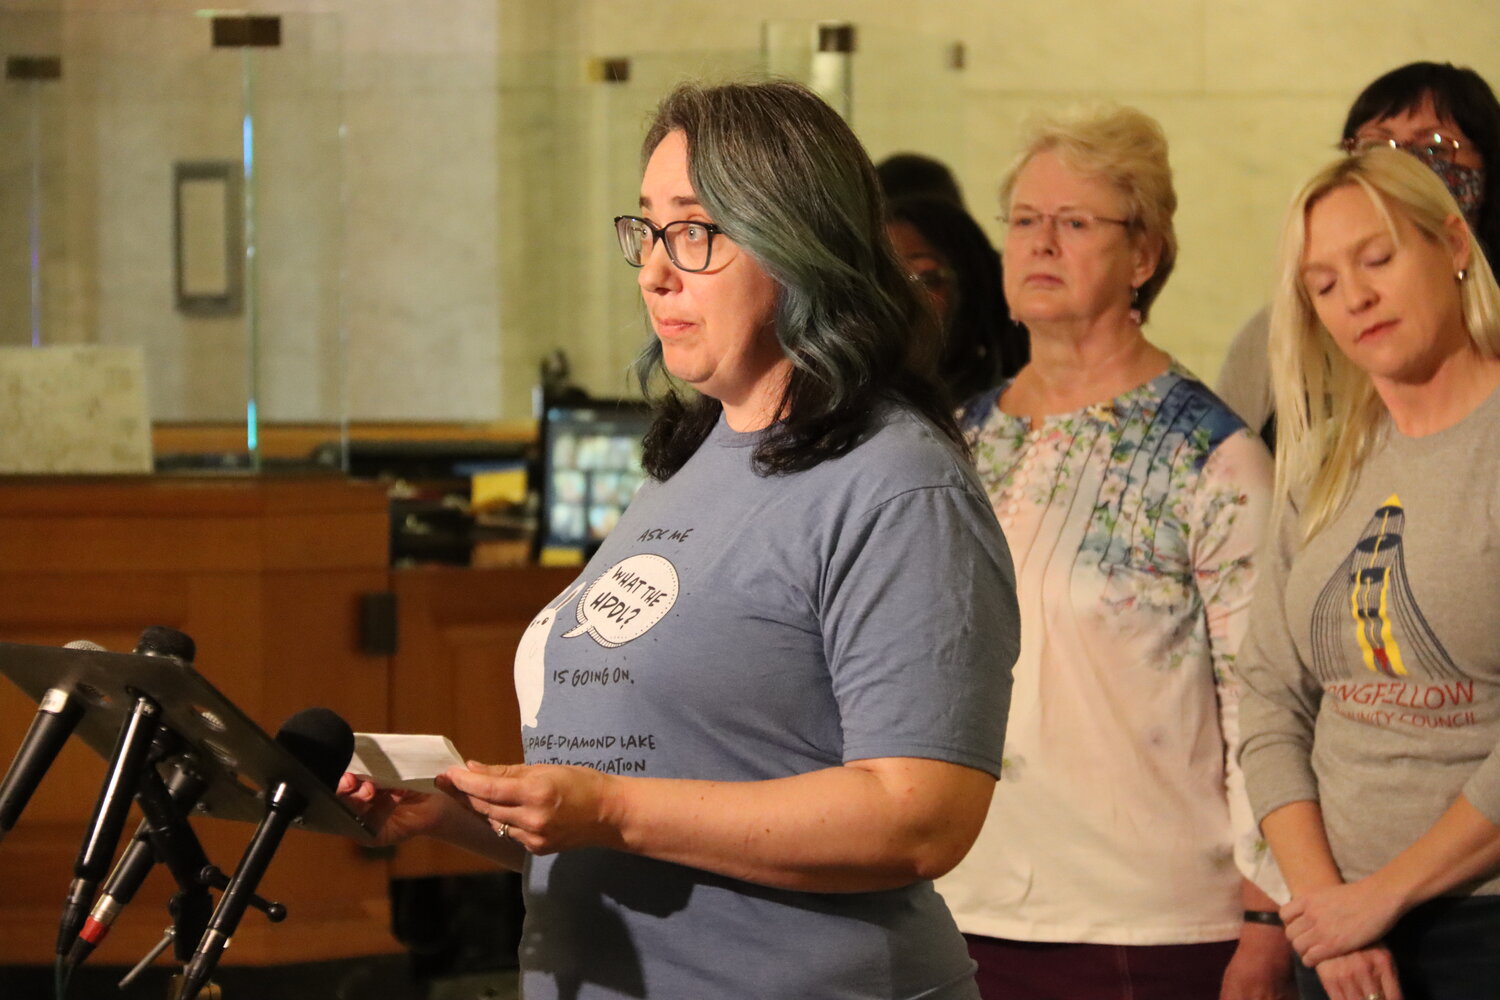 Ann Zawistoski of the Hale Page Diamond Lake Community Association stands in support of more community engagement during the Third Precinct press conference on May 16, 2023 at Minneapolis City Hall.